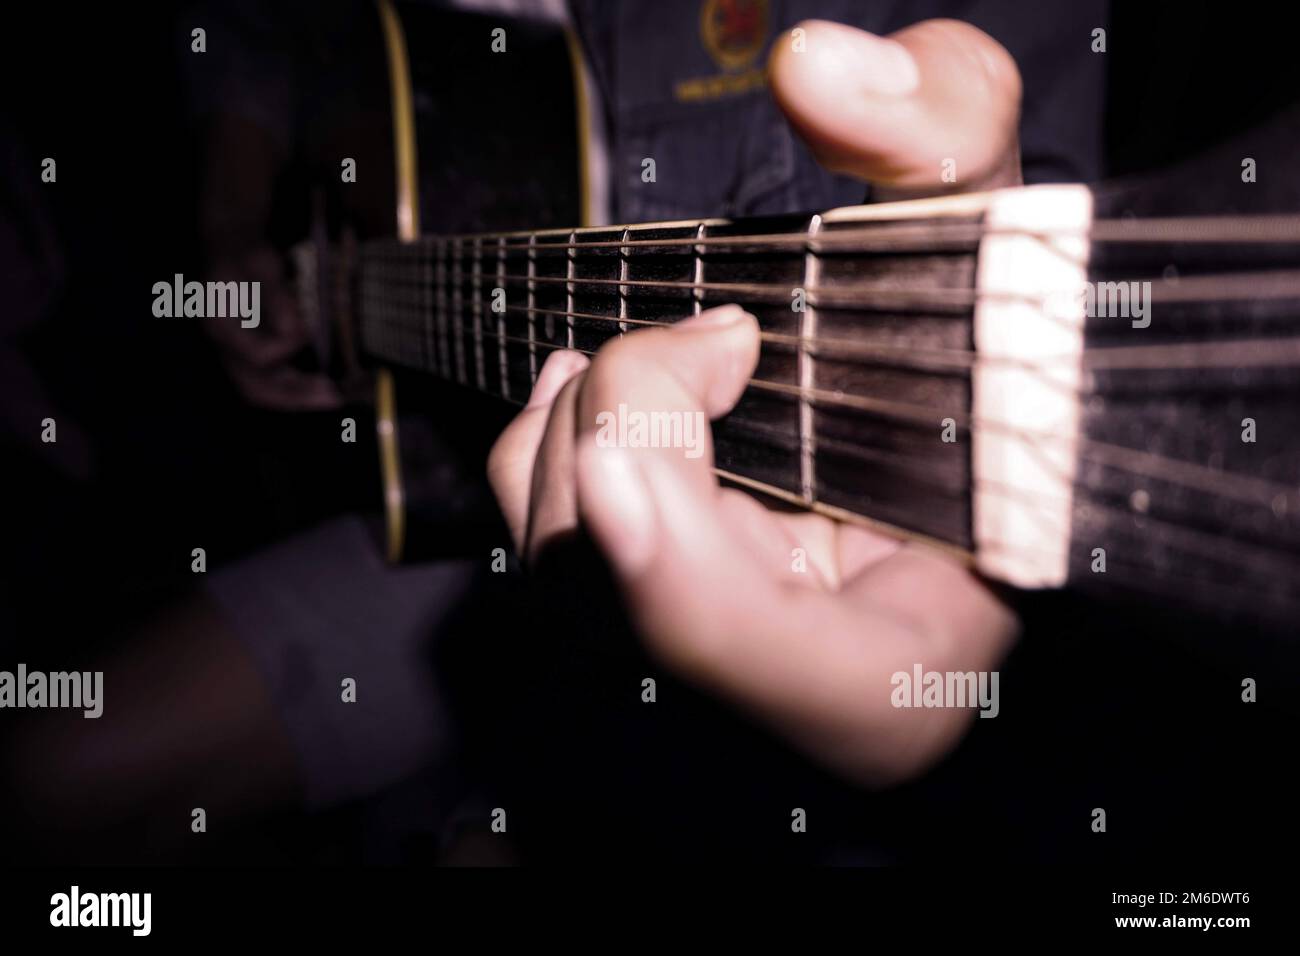 Playing guitar for entertainment. Strum musical instruments Stock Photo